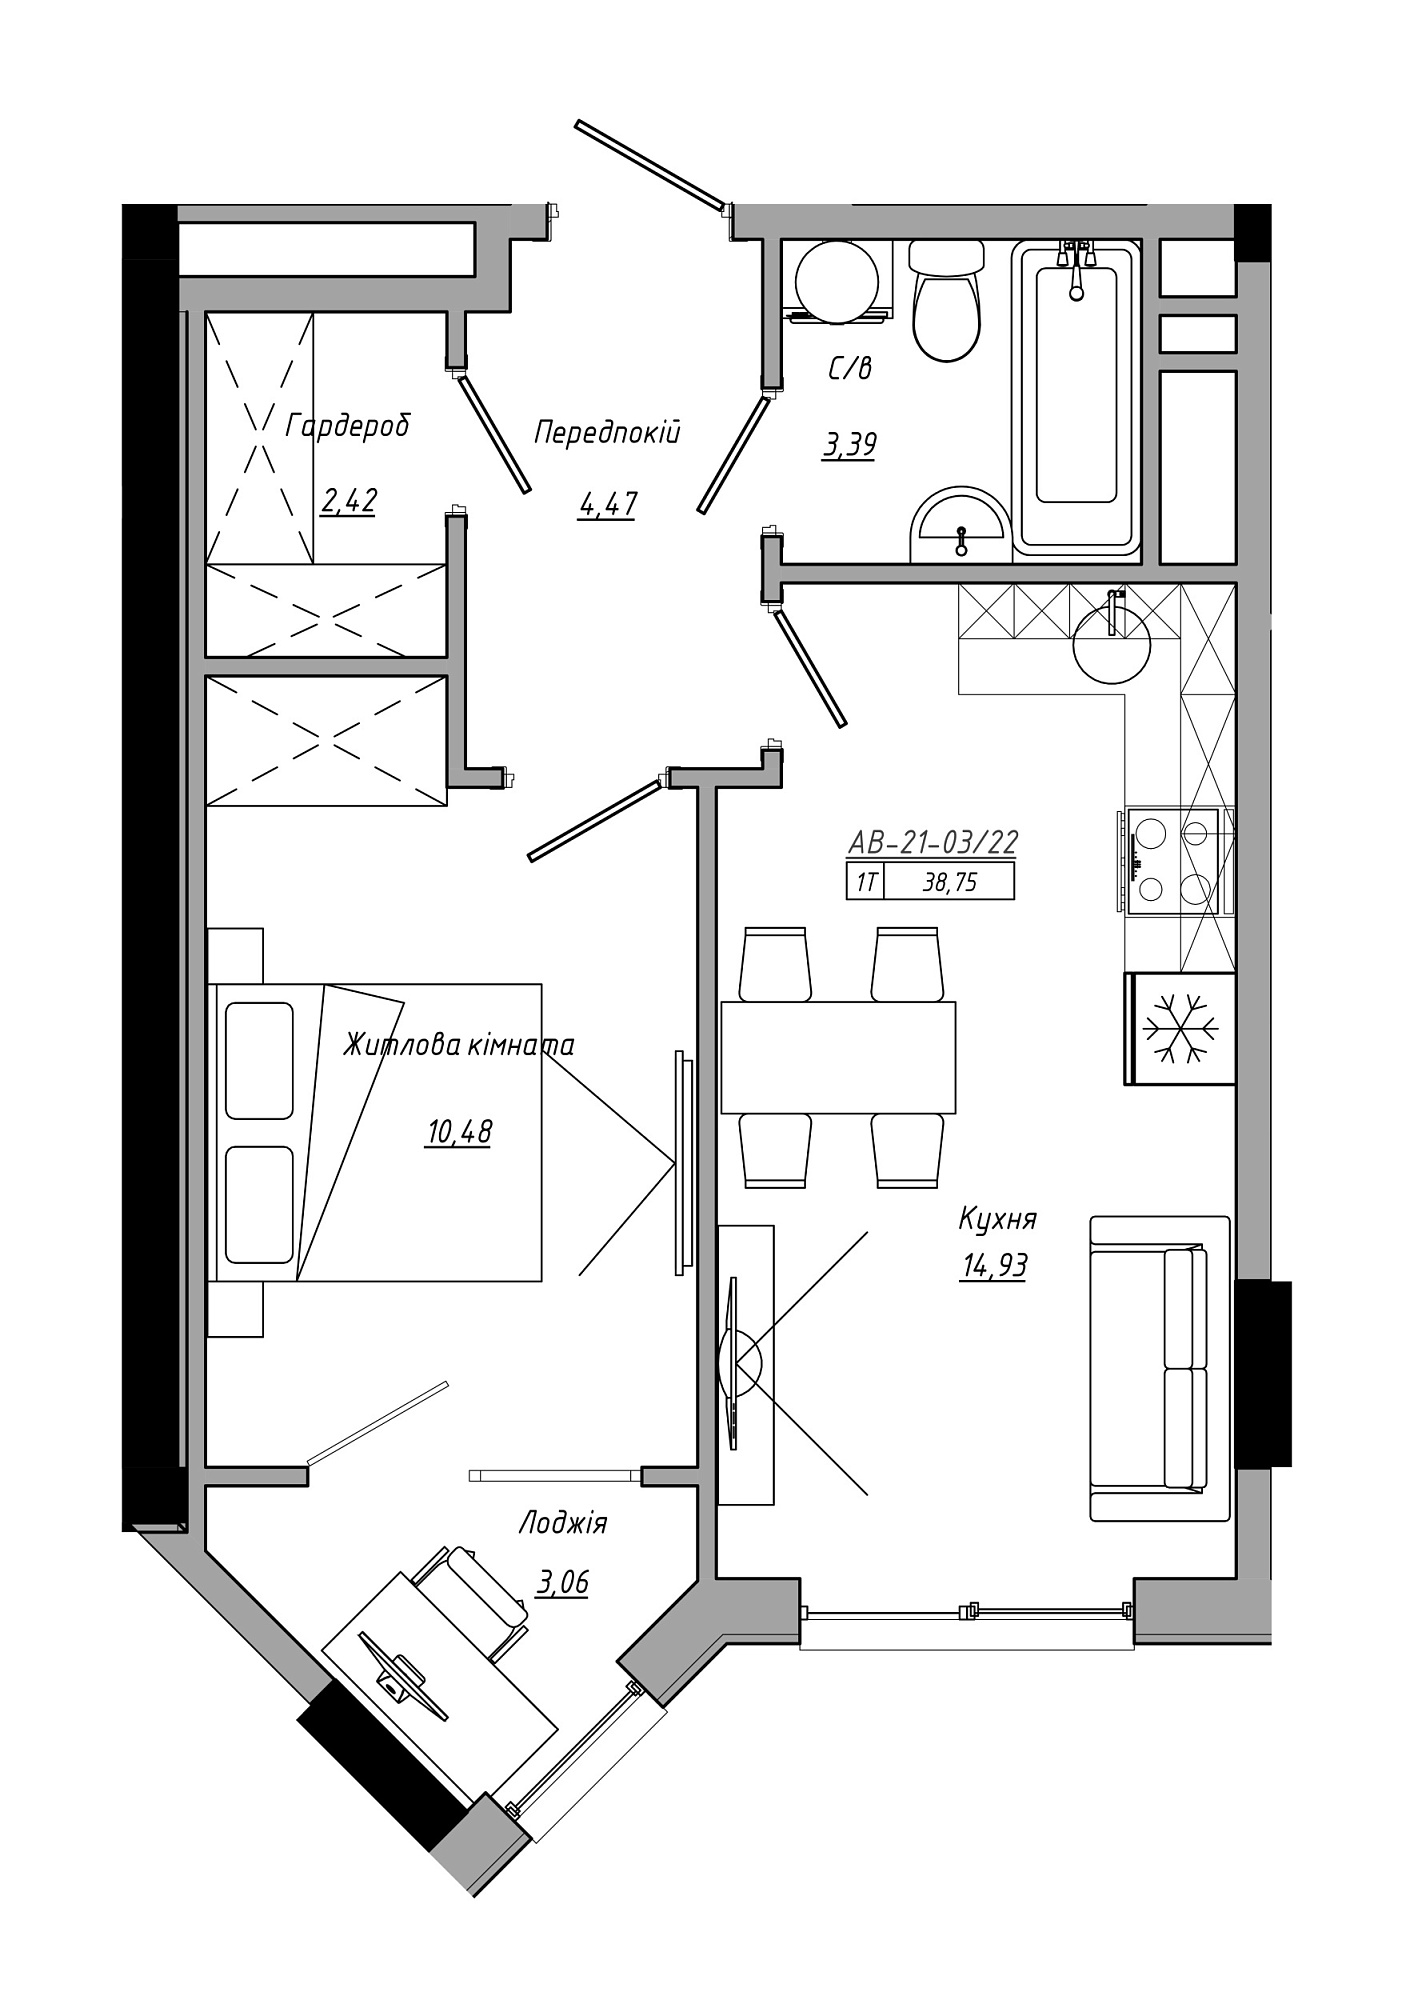 Planning 1-rm flats area 38.75m2, AB-21-03/00022.